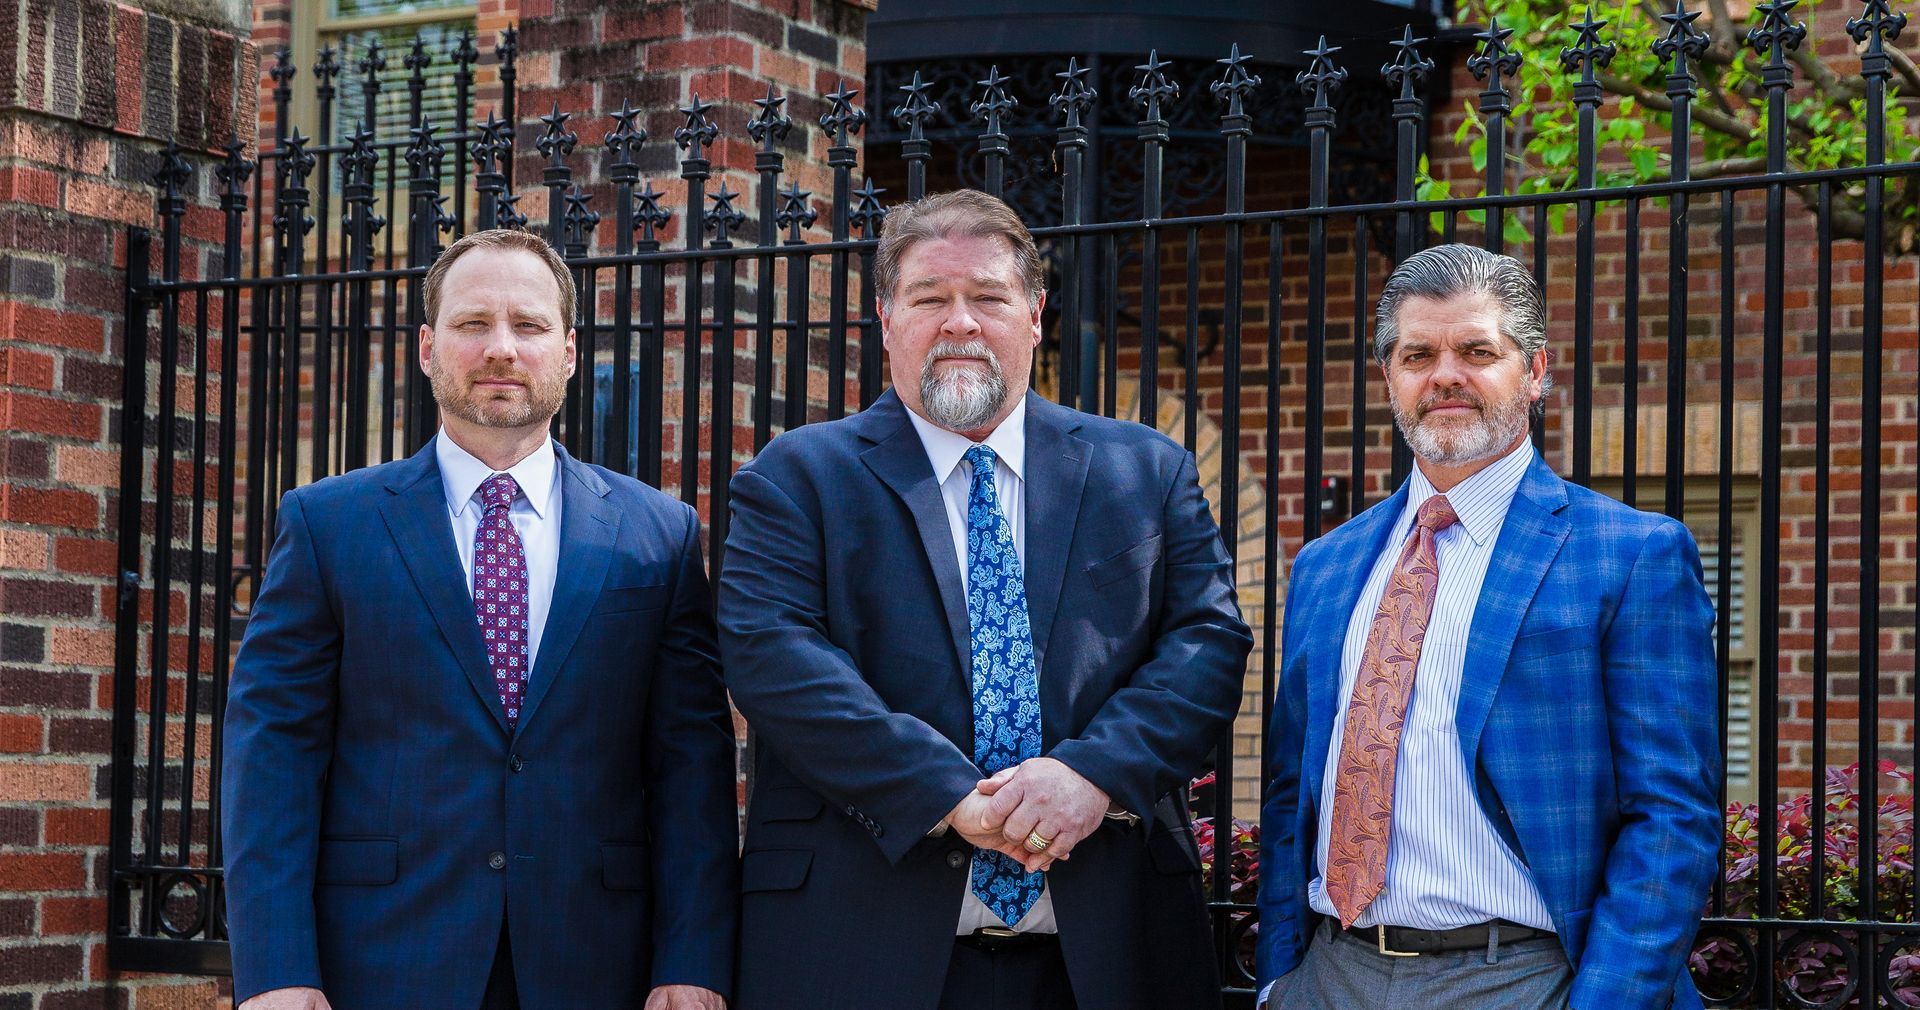 Attorneys Jason Parrish, Gregory Waldron and David Moore